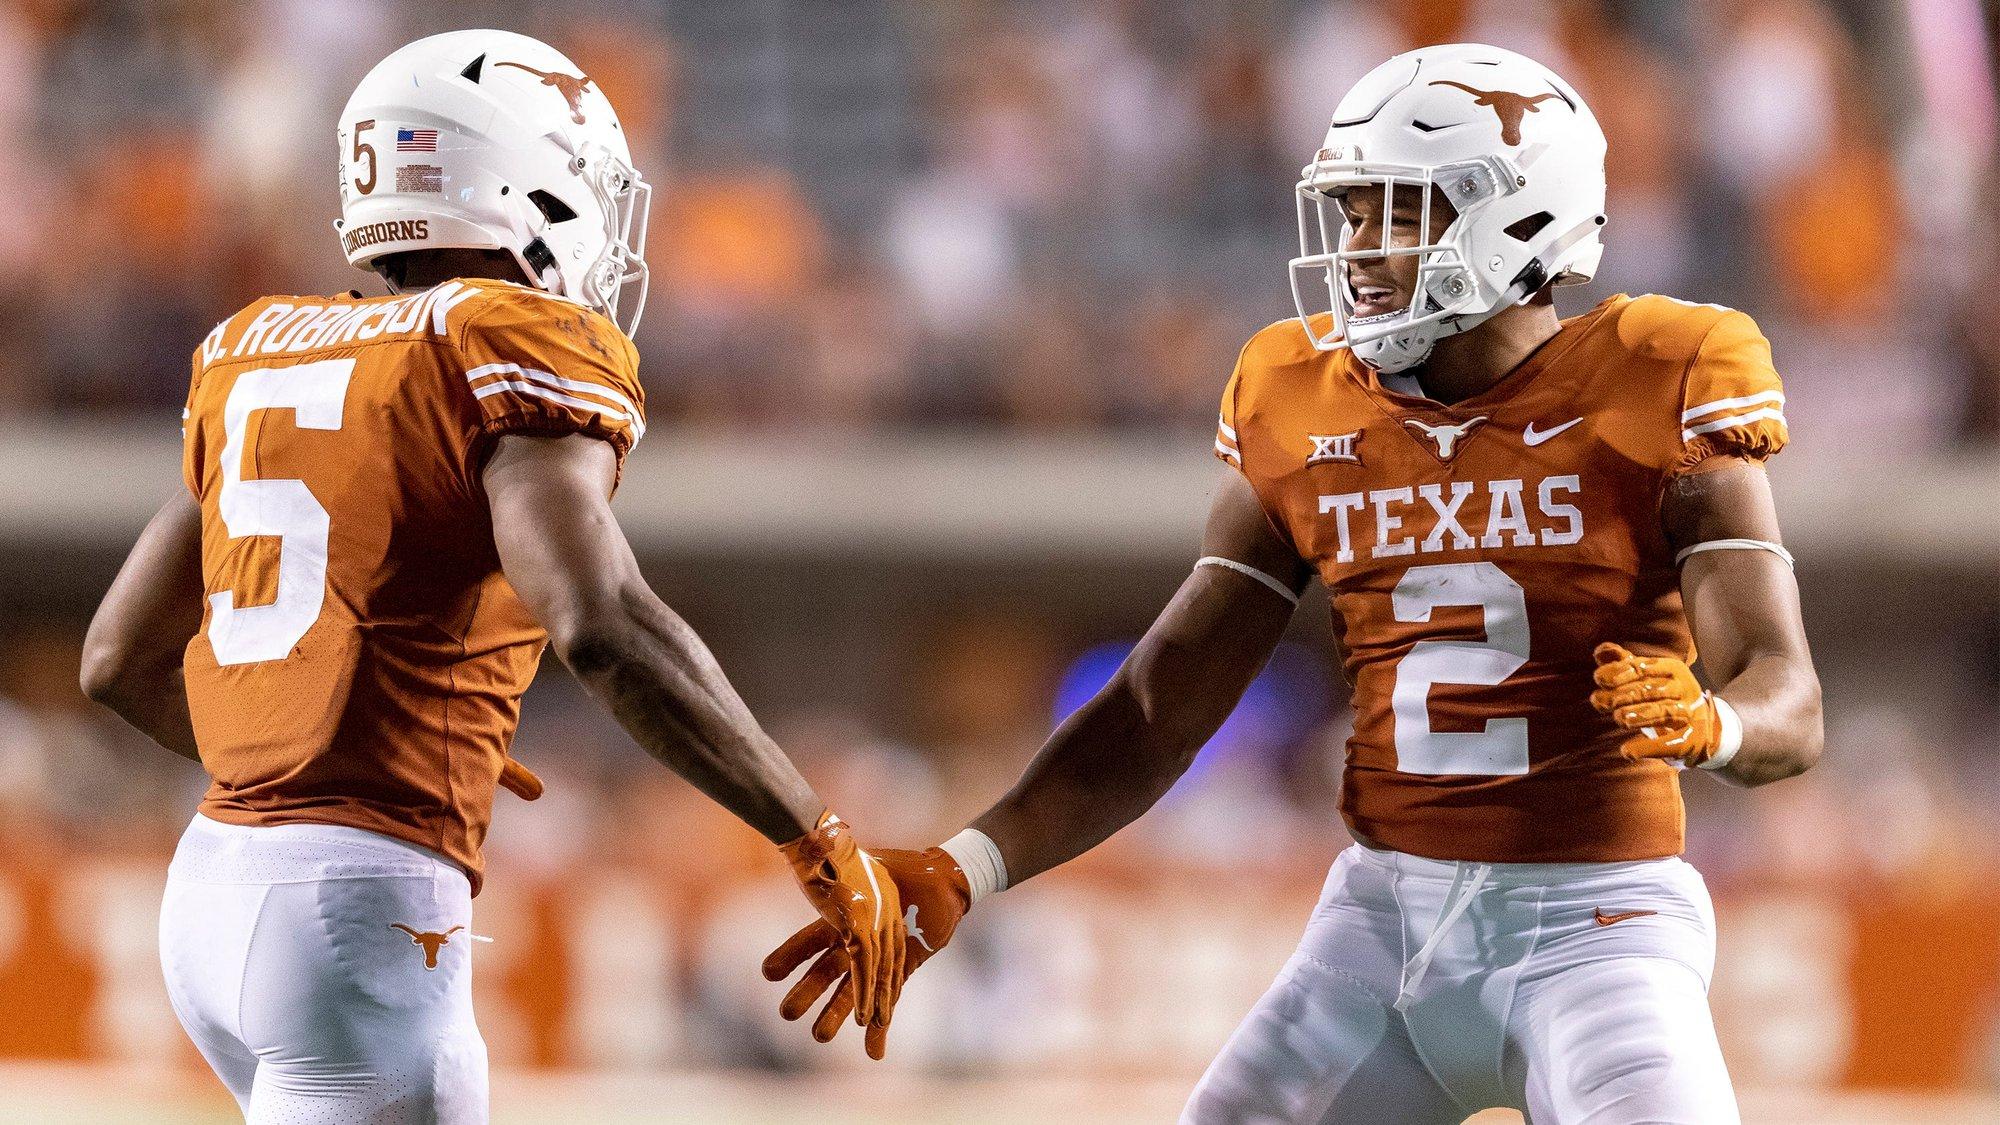 Texas Tech Red Raiders vs Texas Longhorns Betting Preview: Longhorns Look to Push Around a Little Brother in Big 12 Opener